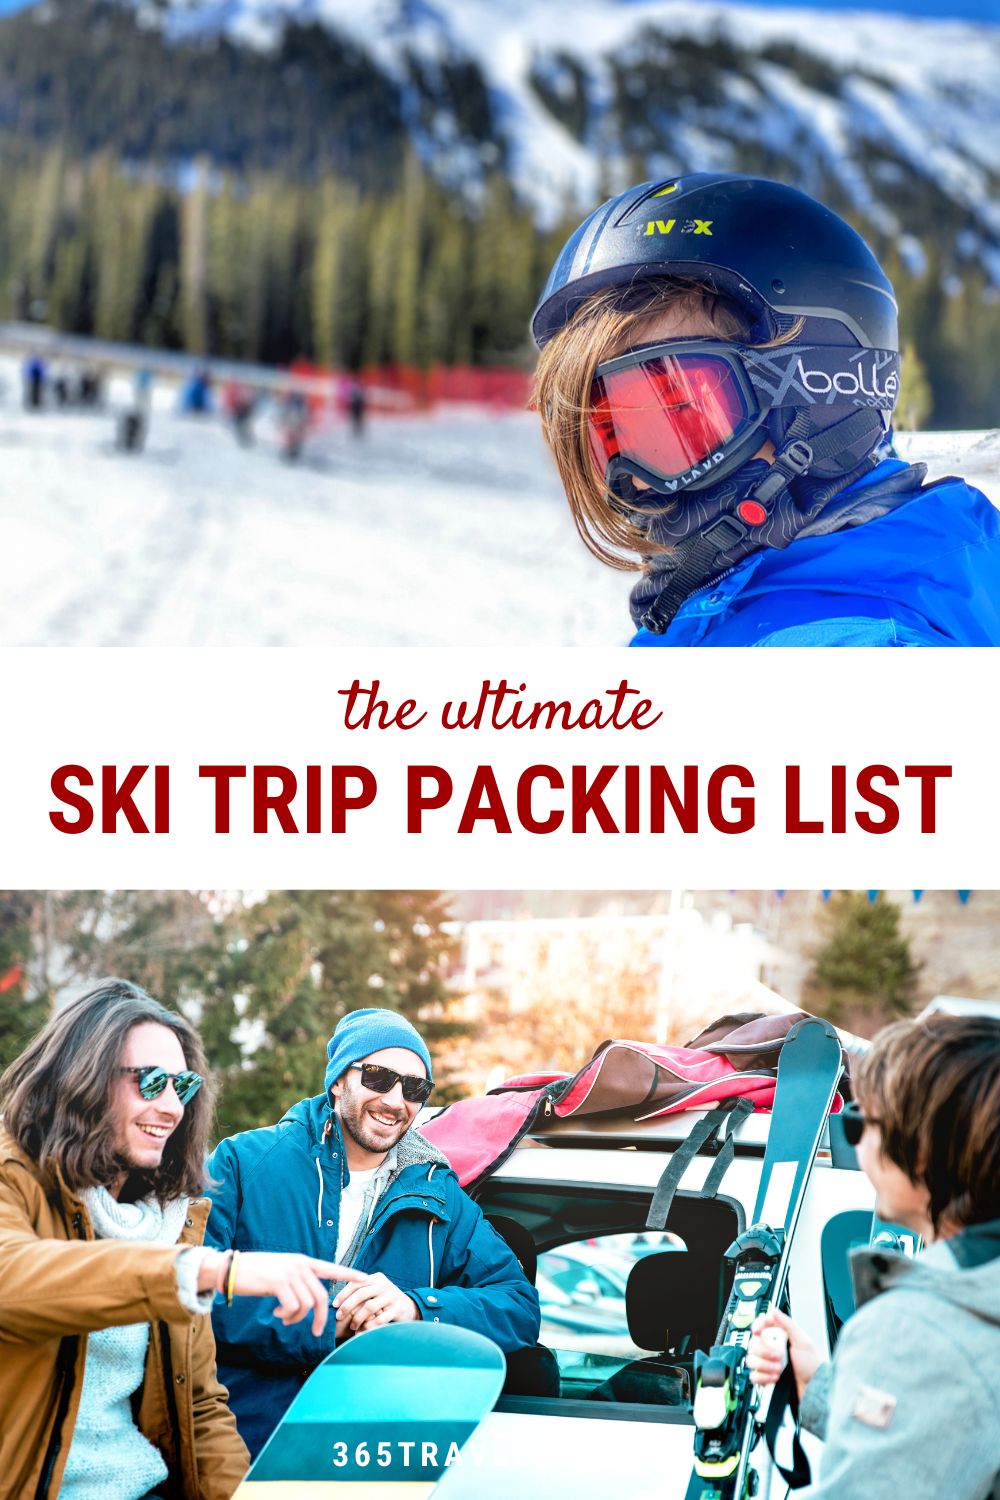 Ski Trip Packing List: 47 Things You Need To Bring (+Snowboarding, Too!)